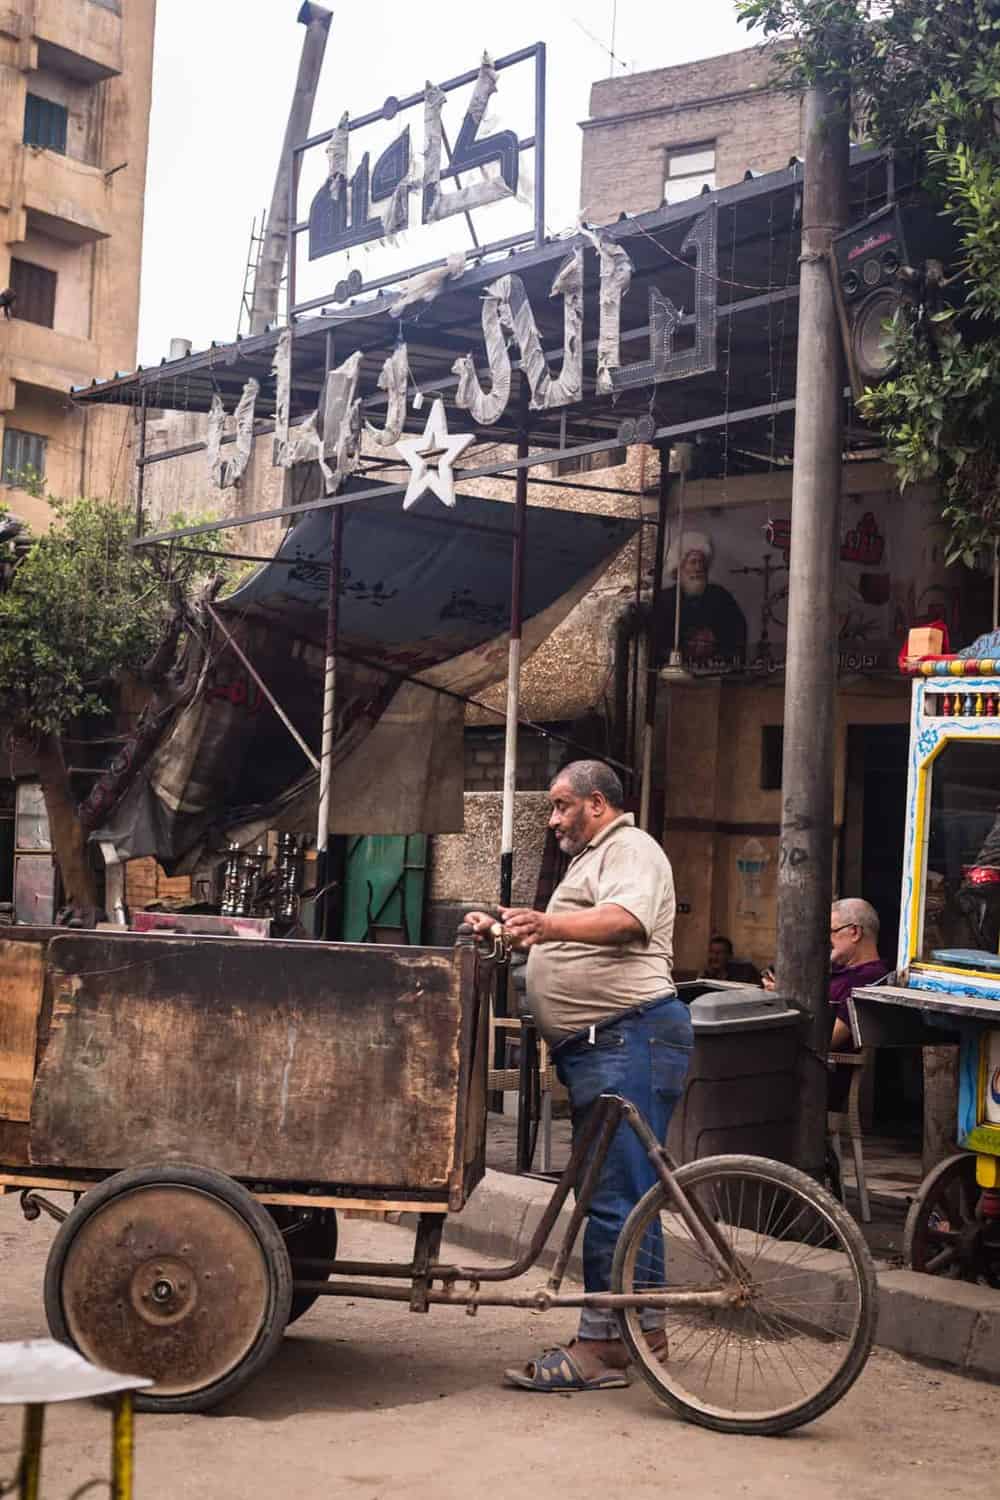 Man with a bicycle cart contraption right outside the gates of Old Cairo.